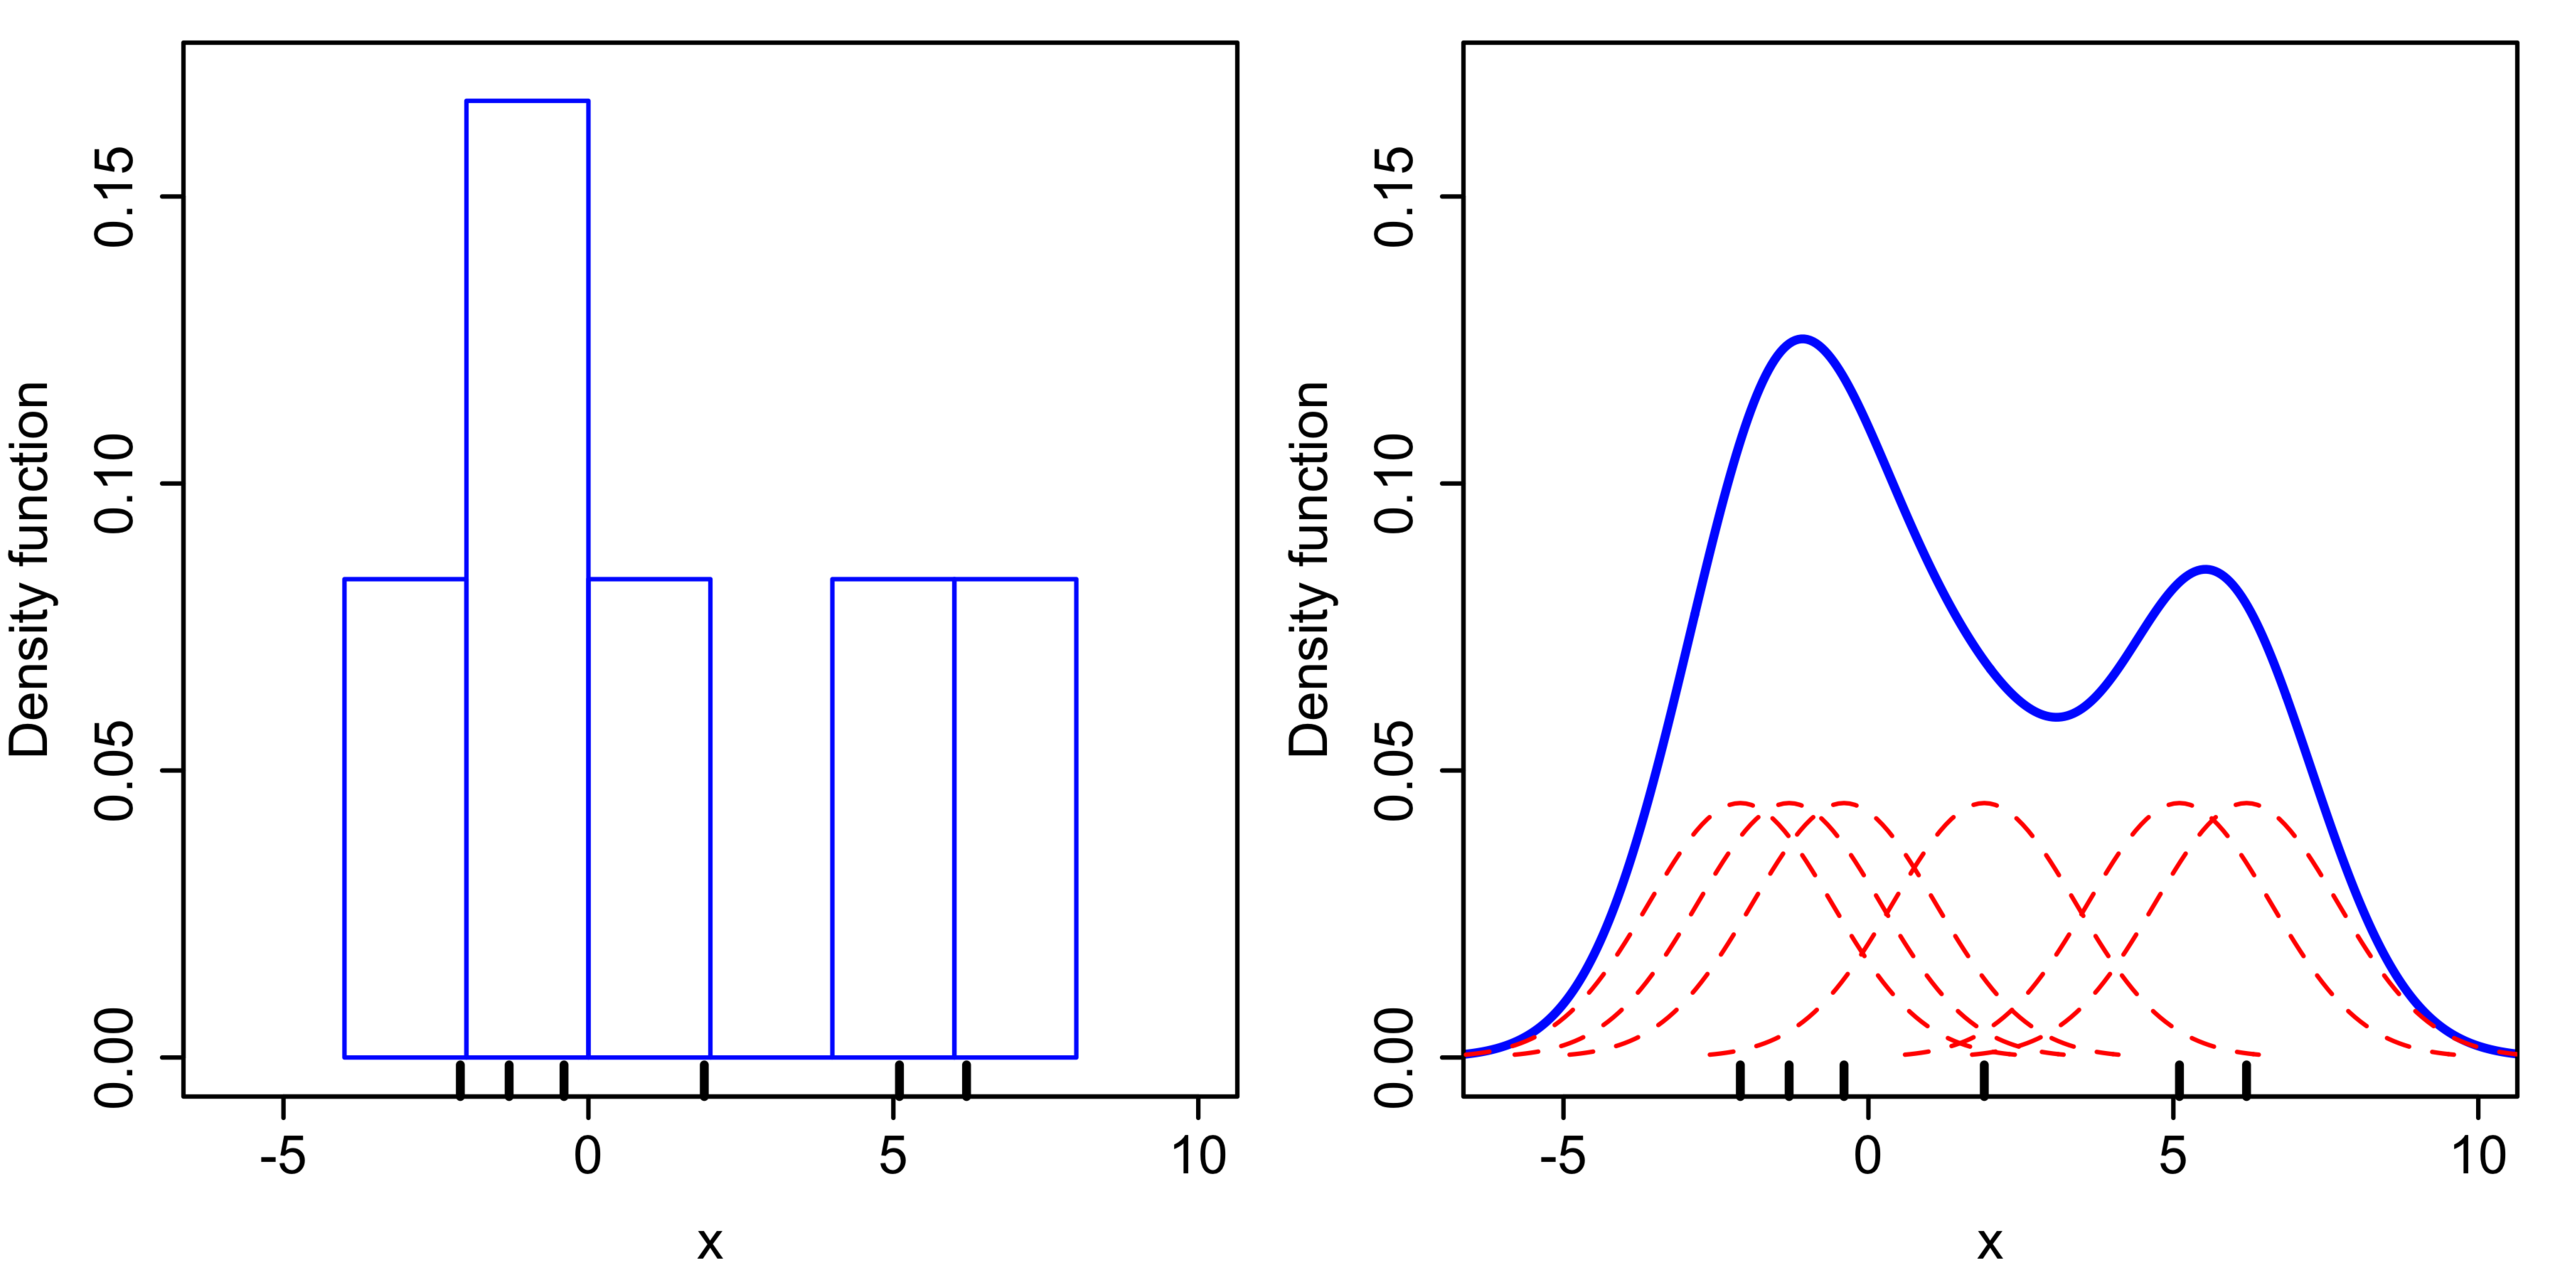 Visualizations for Density Estimations and T-tests